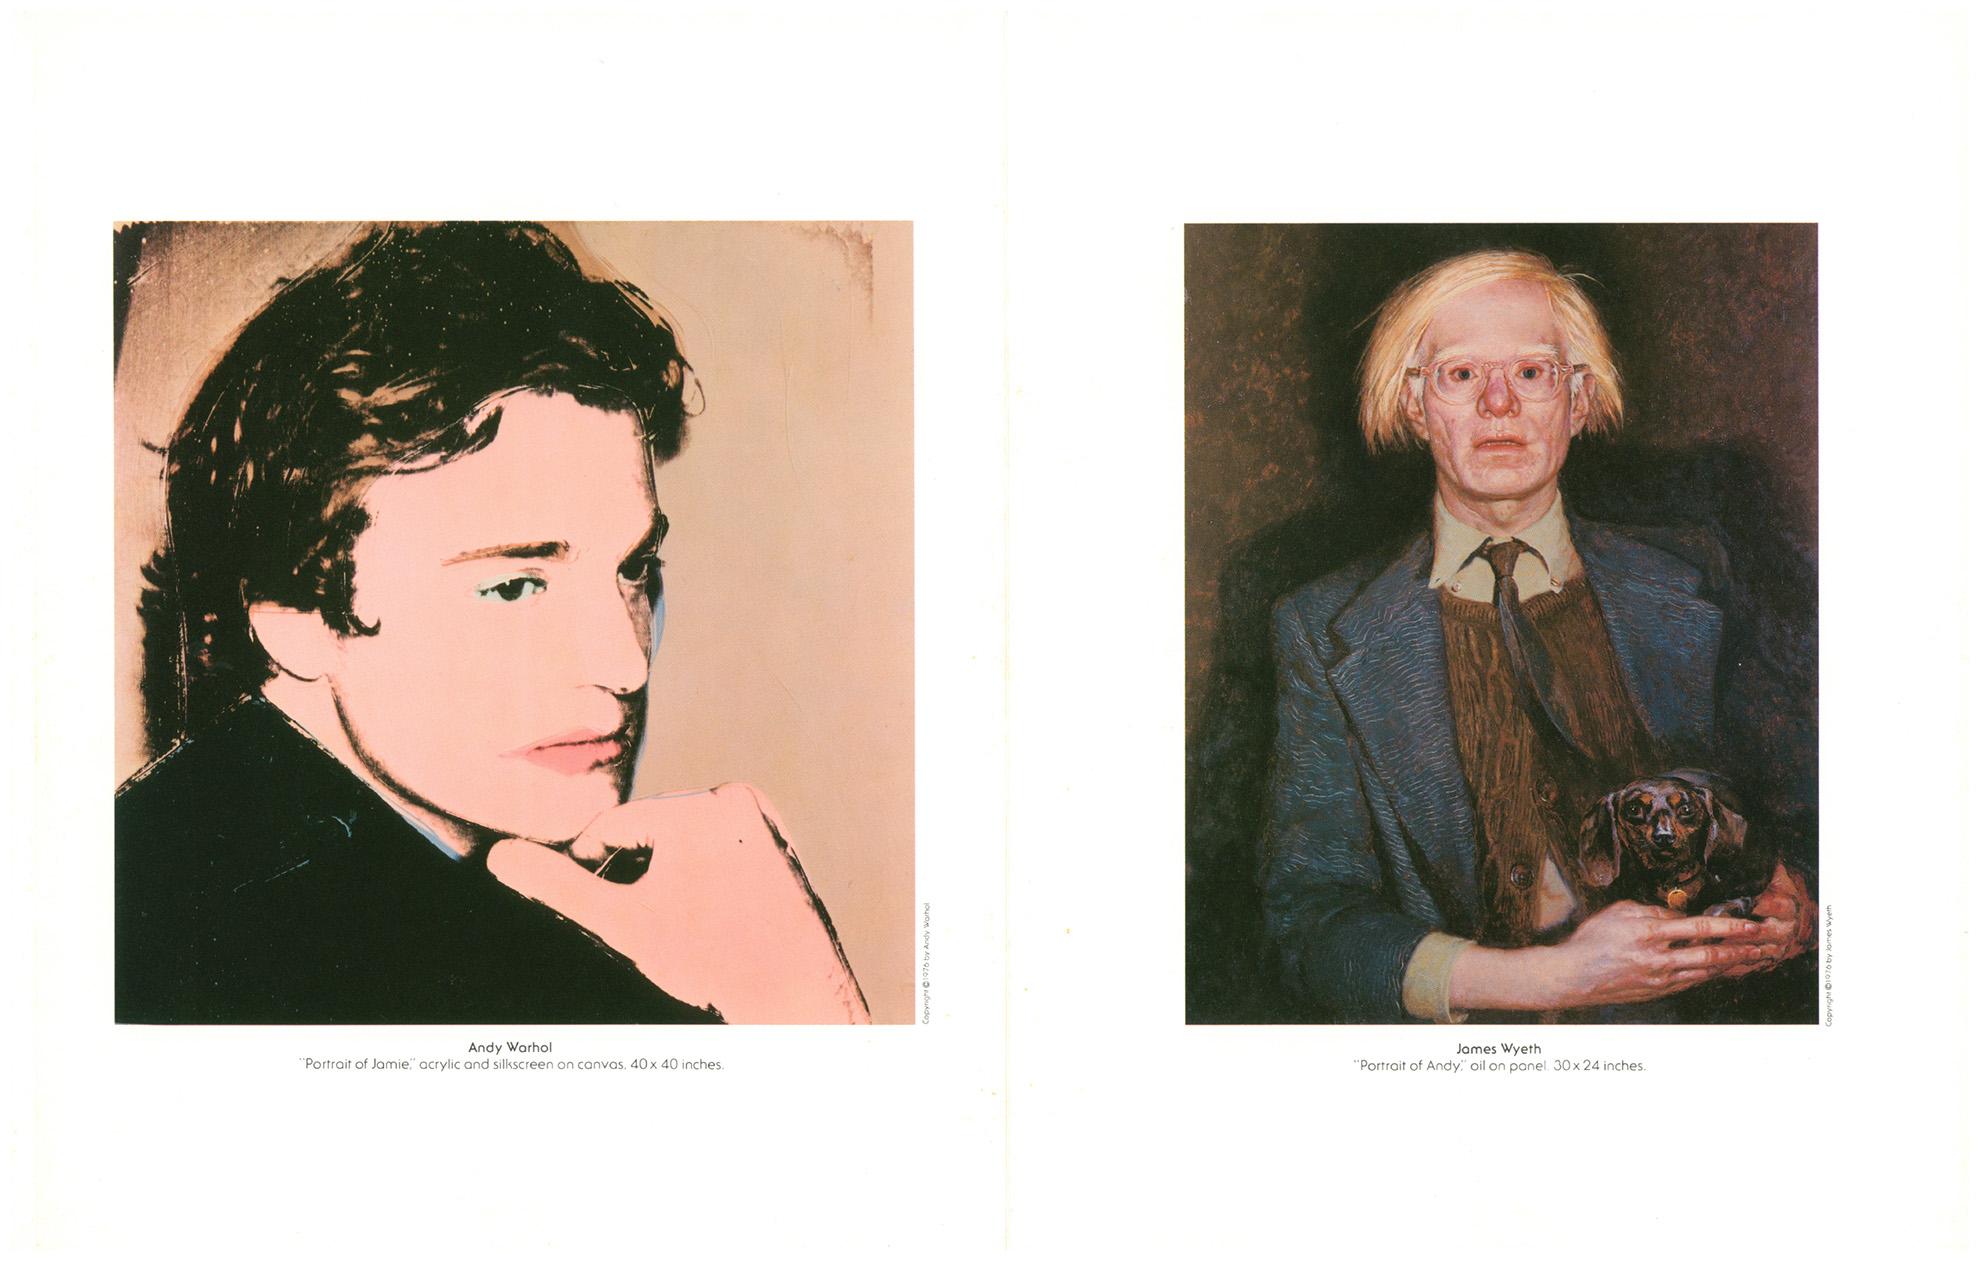 'Andy Warhol & Jamie Wyeth Portraits of Each Other':
Rare, oversized, fold-out museum program published on the occasion of the exhibit: Andy Warhol & Jamie Wyeth Portraits of Each Other, Brandywine River Museum (Brandywine Conservancy) November 26,